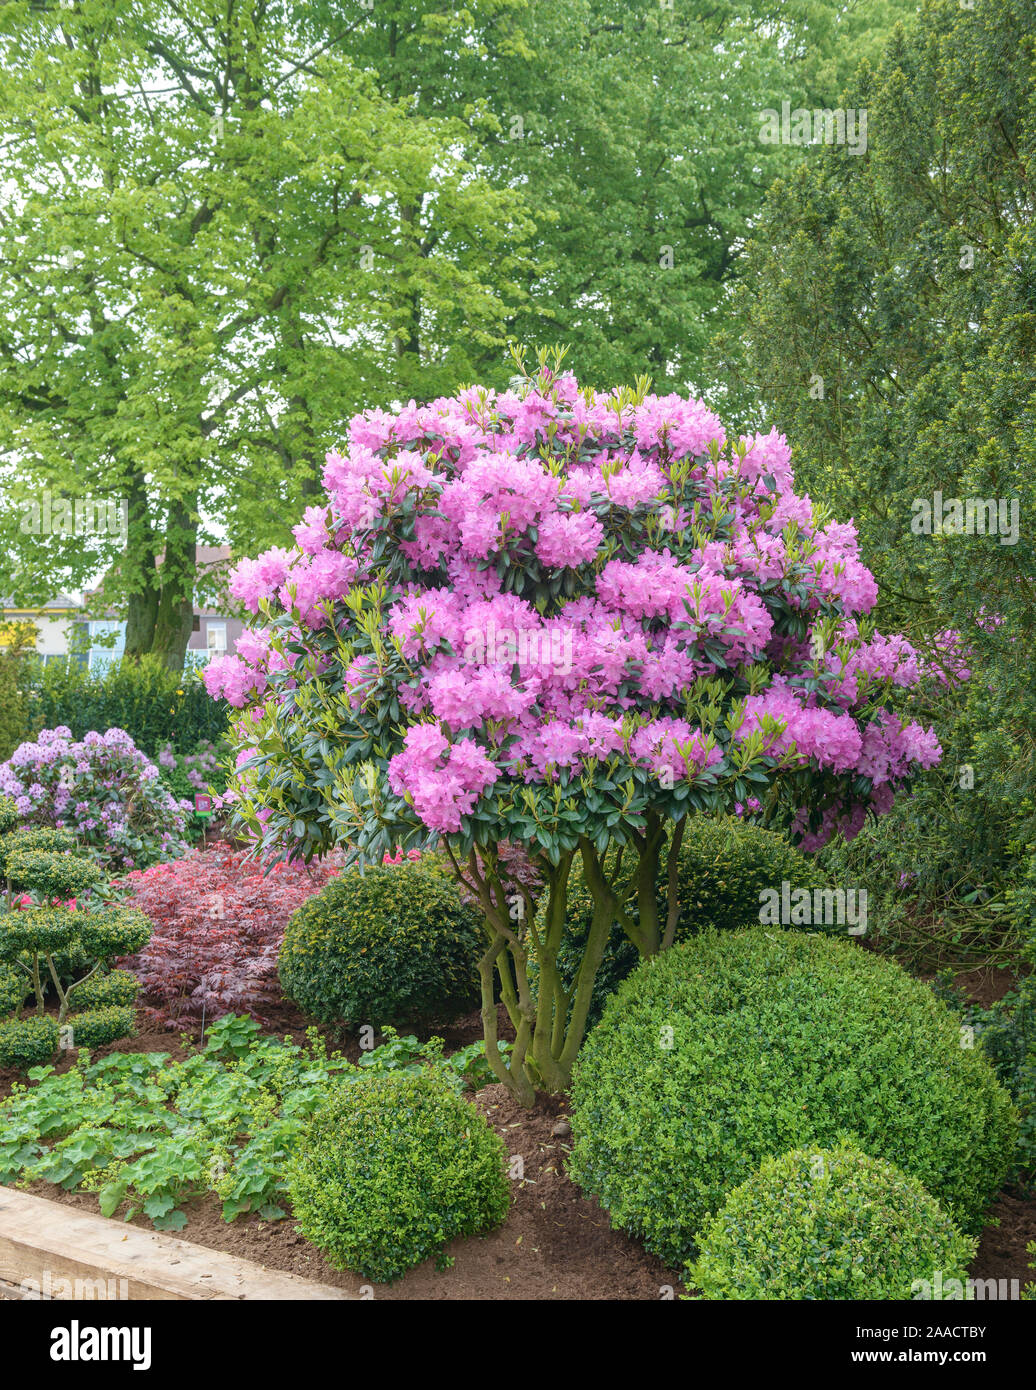 Rhododendron (Rhododendron 'Roseum Elegans') Stock Photo